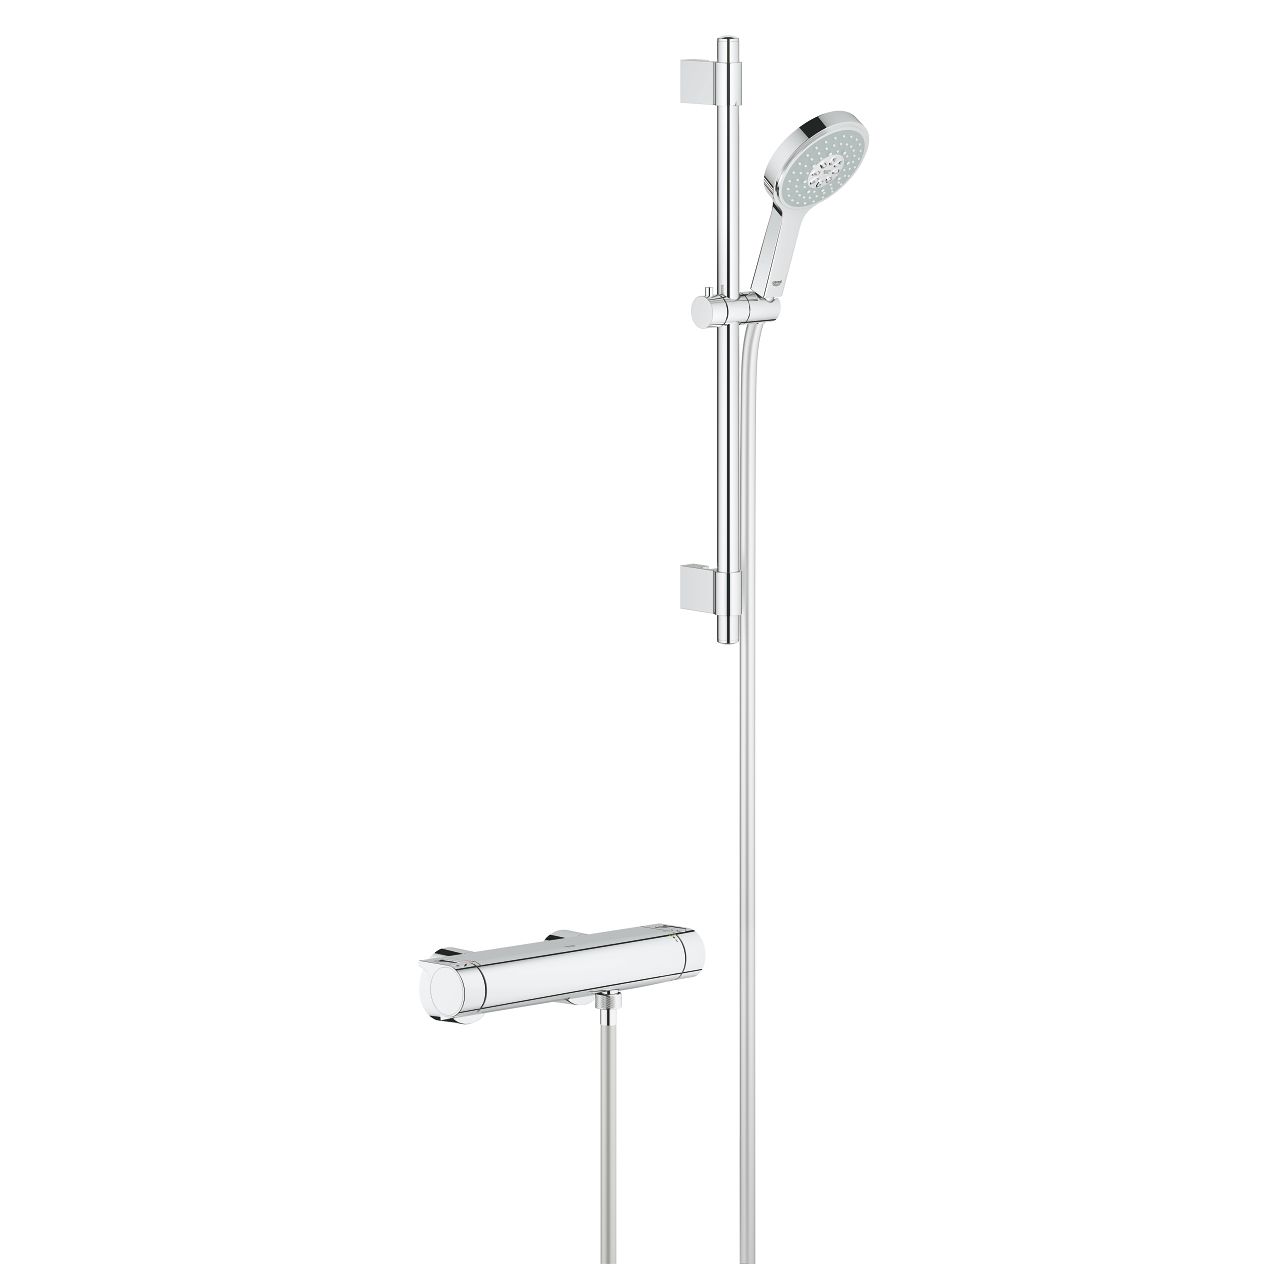  Grohe Grohtherm 2000 Cosmopolitan M - 34281001 